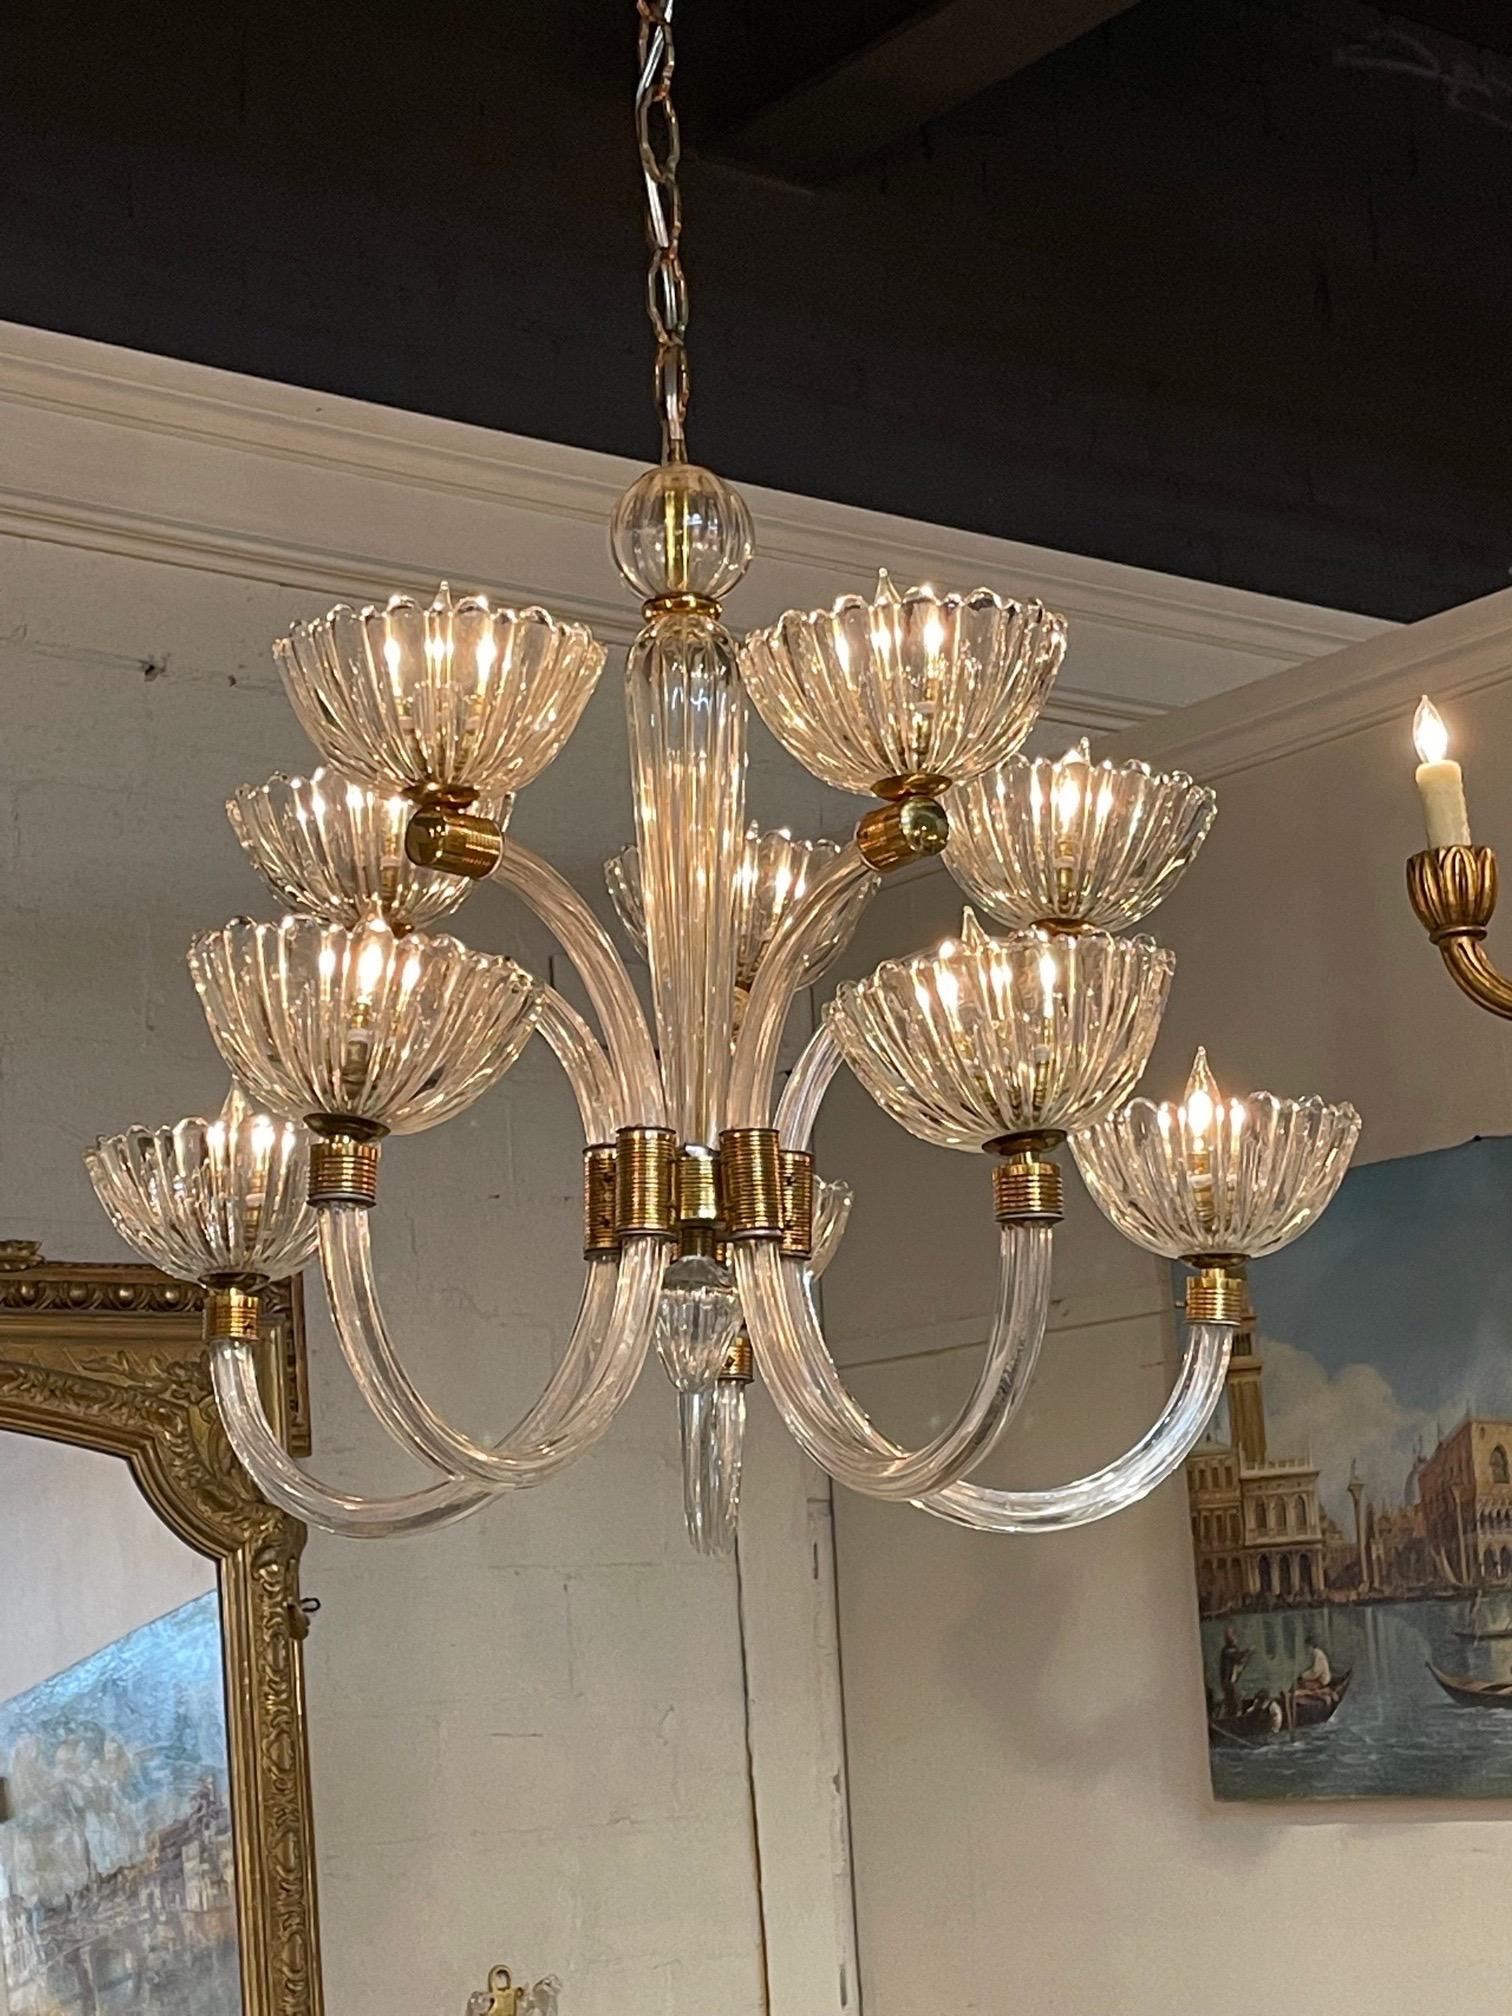 Lovely vintage Murano glass and brass 2 tier chandelier by Barovier. Beautiful scale and shape and the glass just glistens! So pretty! Note: There is a small crack on one of the cups. Not visible unless you search. Fixture is totally stable.